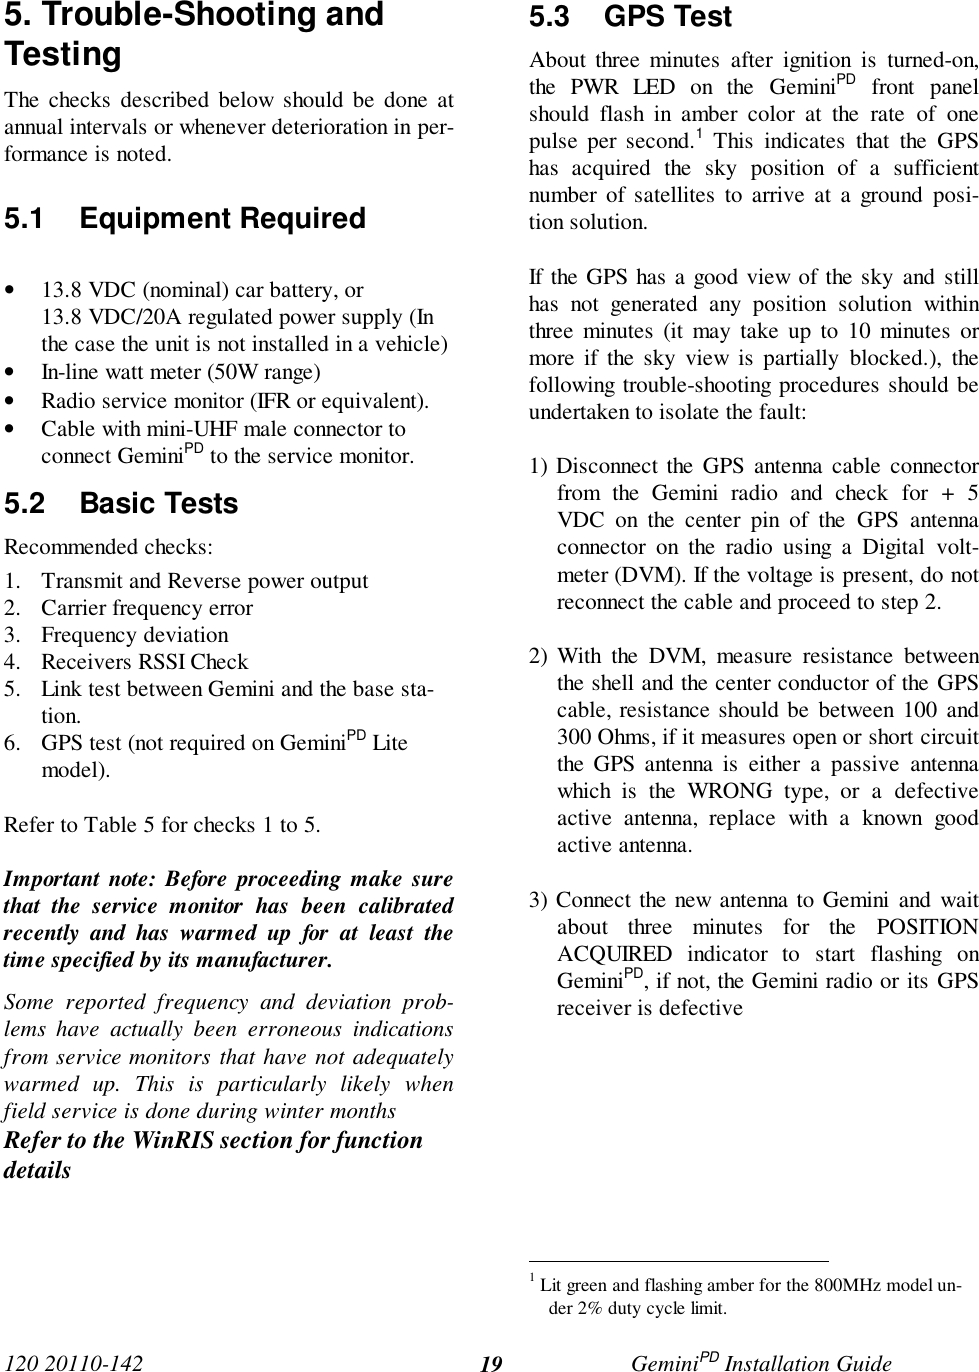 120 20110-142 GeminiPD Installation Guide195. Trouble-Shooting andTestingThe checks described below should be done atannual intervals or whenever deterioration in per-formance is noted.5.1 Equipment Required• 13.8 VDC (nominal) car battery, or13.8 VDC/20A regulated power supply (Inthe case the unit is not installed in a vehicle)• In-line watt meter (50W range)• Radio service monitor (IFR or equivalent).• Cable with mini-UHF male connector toconnect GeminiPD to the service monitor.5.2 Basic TestsRecommended checks:1. Transmit and Reverse power output2. Carrier frequency error3. Frequency deviation4. Receivers RSSI Check5. Link test between Gemini and the base sta-tion.6. GPS test (not required on GeminiPD Litemodel).Refer to Table 5 for checks 1 to 5.Important note: Before proceeding make surethat the service monitor has been calibratedrecently and has warmed up for at least thetime specified by its manufacturer.Some reported frequency and deviation prob-lems have actually been erroneous indicationsfrom service monitors that have not adequatelywarmed up. This is particularly likely whenfield service is done during winter monthsRefer to the WinRIS section for functiondetails5.3 GPS TestAbout three minutes after ignition is turned-on,the PWR LED on the GeminiPD front panelshould flash in amber color at the rate of onepulse per second.1 This indicates that the GPShas acquired the sky position of a sufficientnumber of satellites to arrive at a ground posi-tion solution.If the GPS has a good view of the sky and stillhas not generated any position solution withinthree minutes (it may take up to 10 minutes ormore if the sky view is partially blocked.), thefollowing trouble-shooting procedures should beundertaken to isolate the fault:1) Disconnect the GPS antenna cable connectorfrom the Gemini radio and check for + 5VDC on the center pin of the GPS antennaconnector on the radio using a Digital volt-meter (DVM). If the voltage is present, do notreconnect the cable and proceed to step 2.2) With the DVM, measure resistance betweenthe shell and the center conductor of the GPScable, resistance should be between 100 and300 Ohms, if it measures open or short circuitthe GPS antenna is either a passive antennawhich is the WRONG type, or a defectiveactive antenna, replace with a known goodactive antenna.3) Connect the new antenna to Gemini and waitabout three minutes for the POSITIONACQUIRED indicator to start flashing onGeminiPD, if not, the Gemini radio or its GPSreceiver is defective                                                1 Lit green and flashing amber for the 800MHz model un-der 2% duty cycle limit.